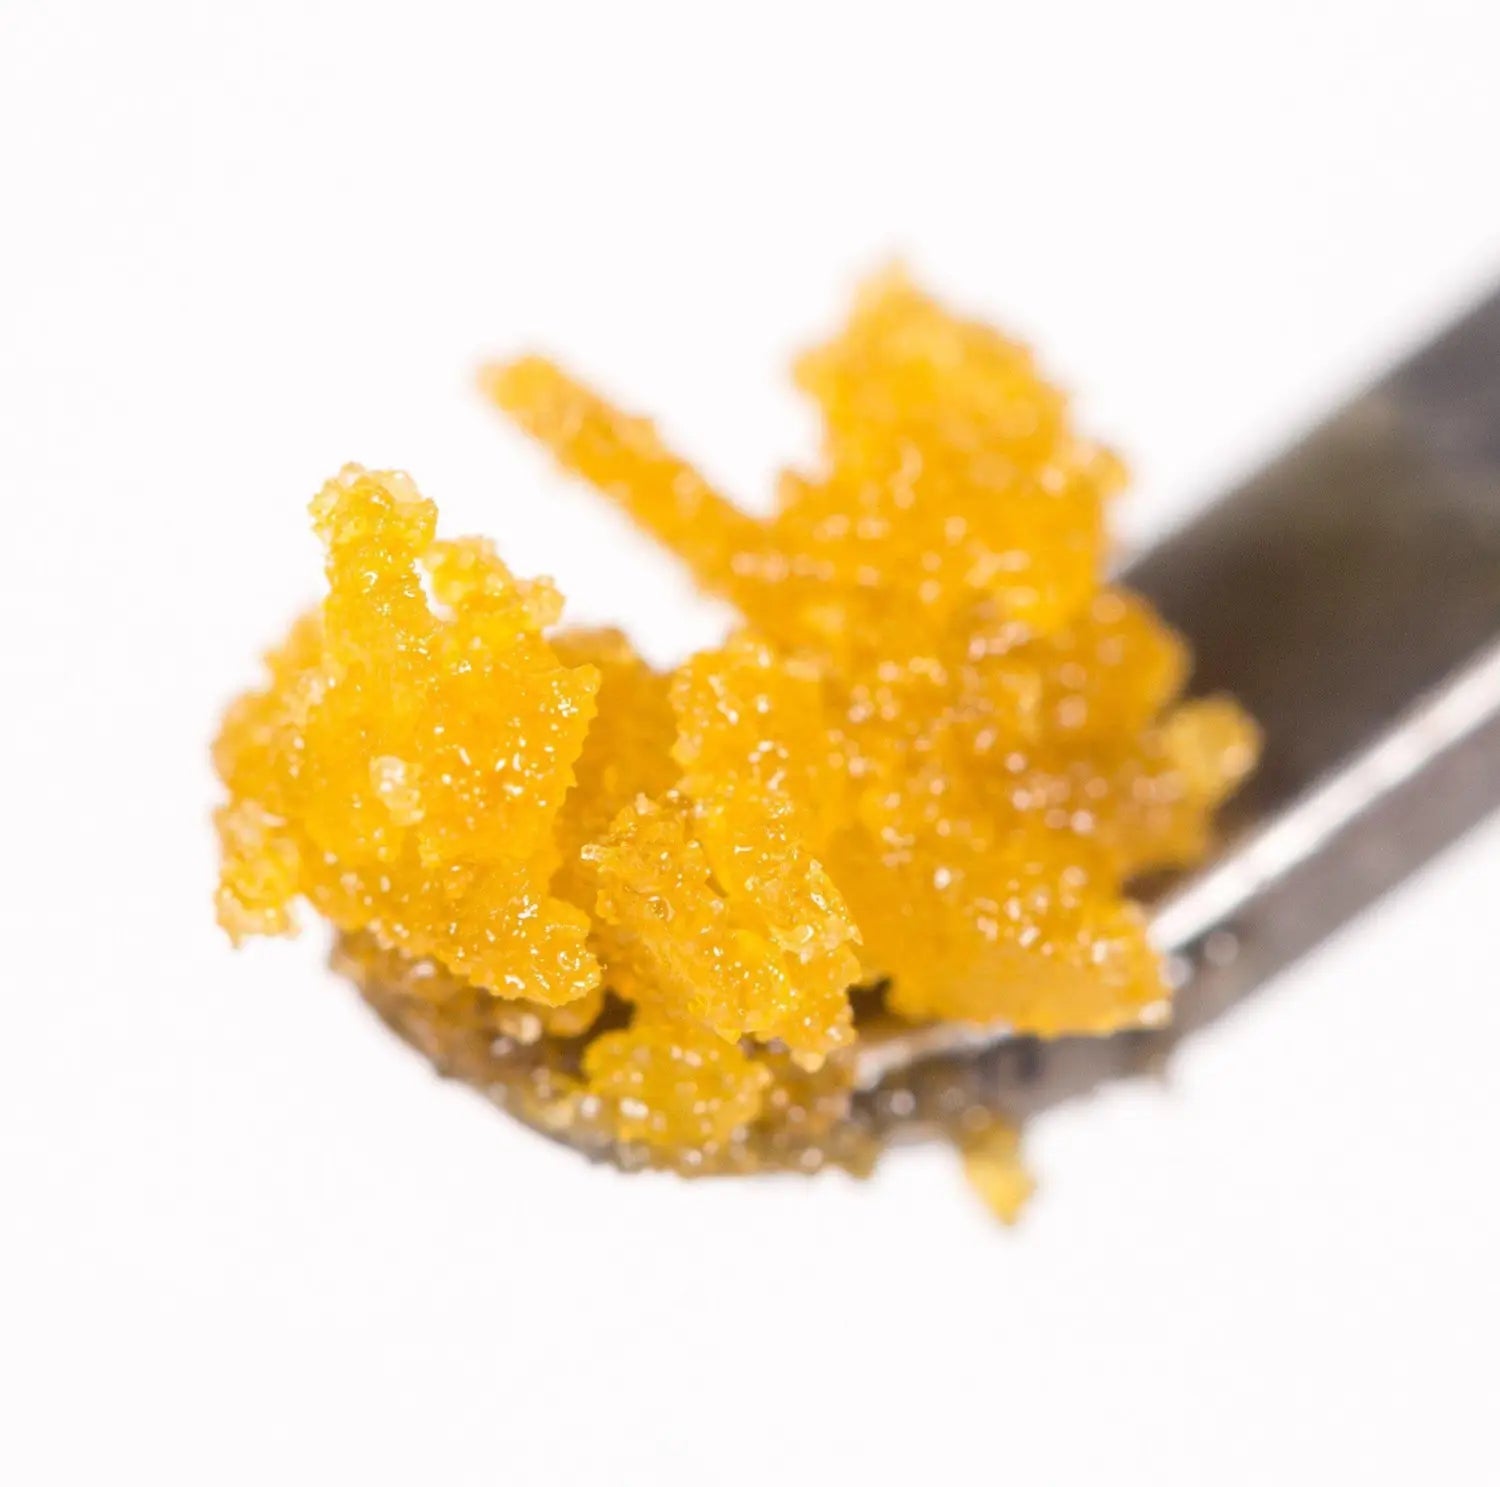 Dabbing Tools: Everything You Need to Get Started